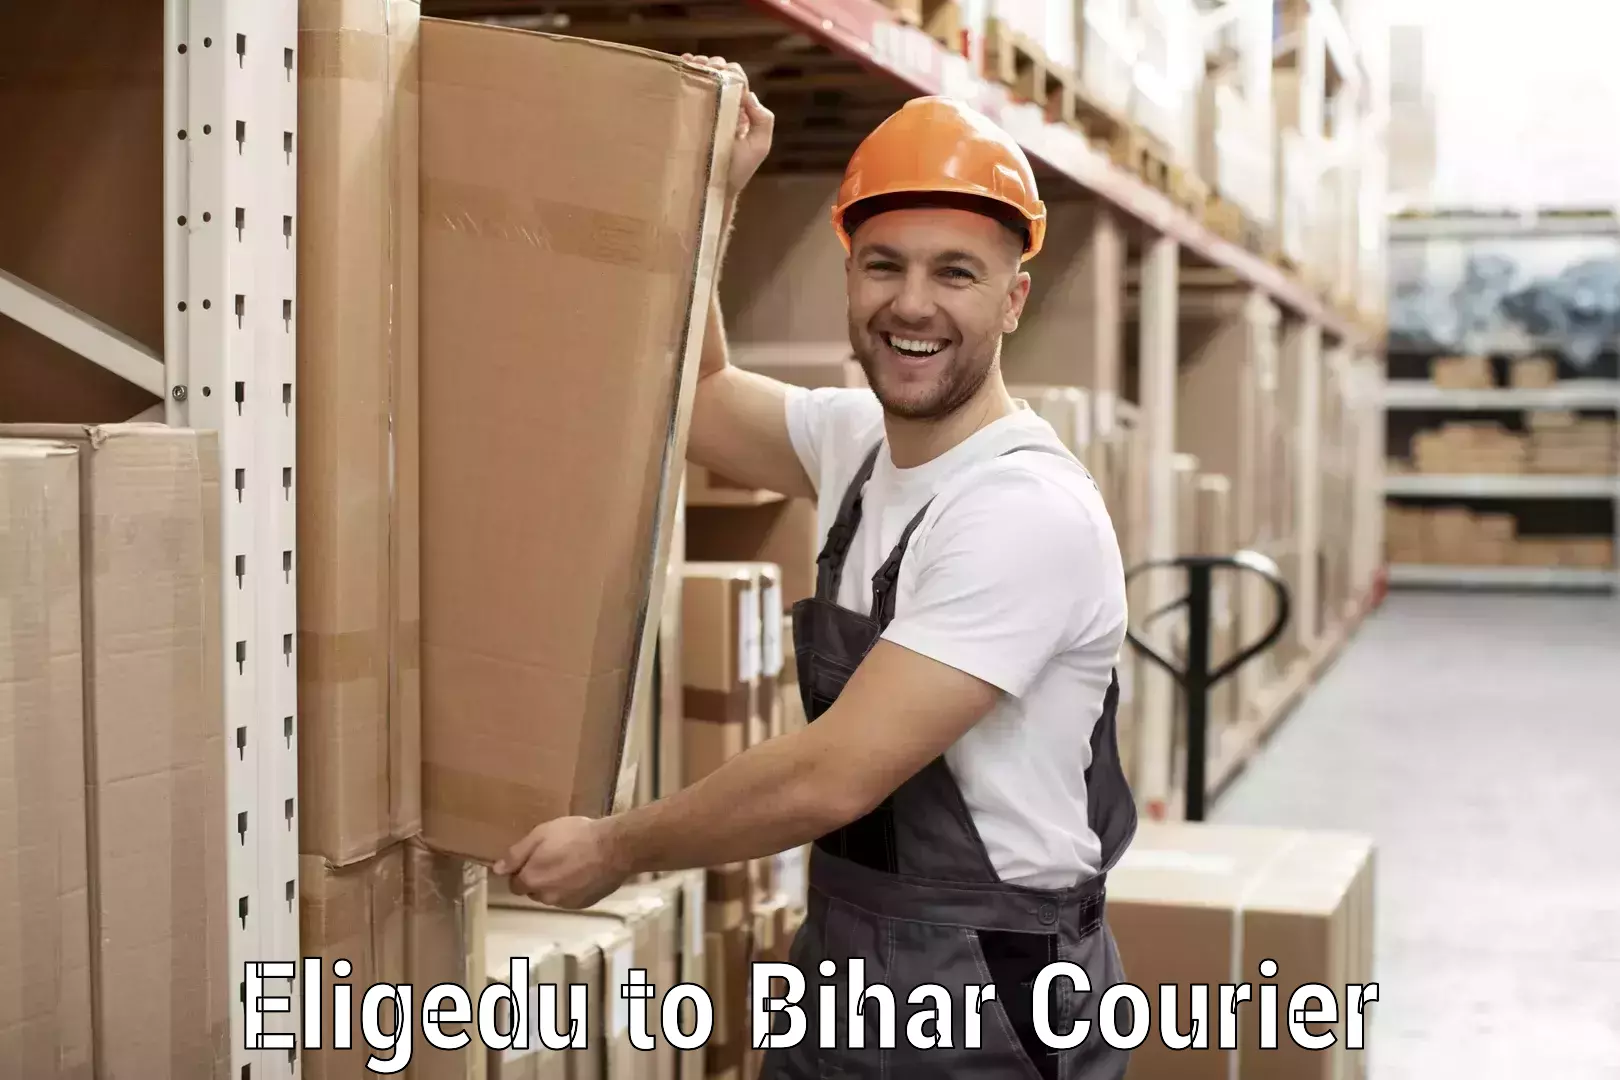 Courier service partnerships Eligedu to Rohtas